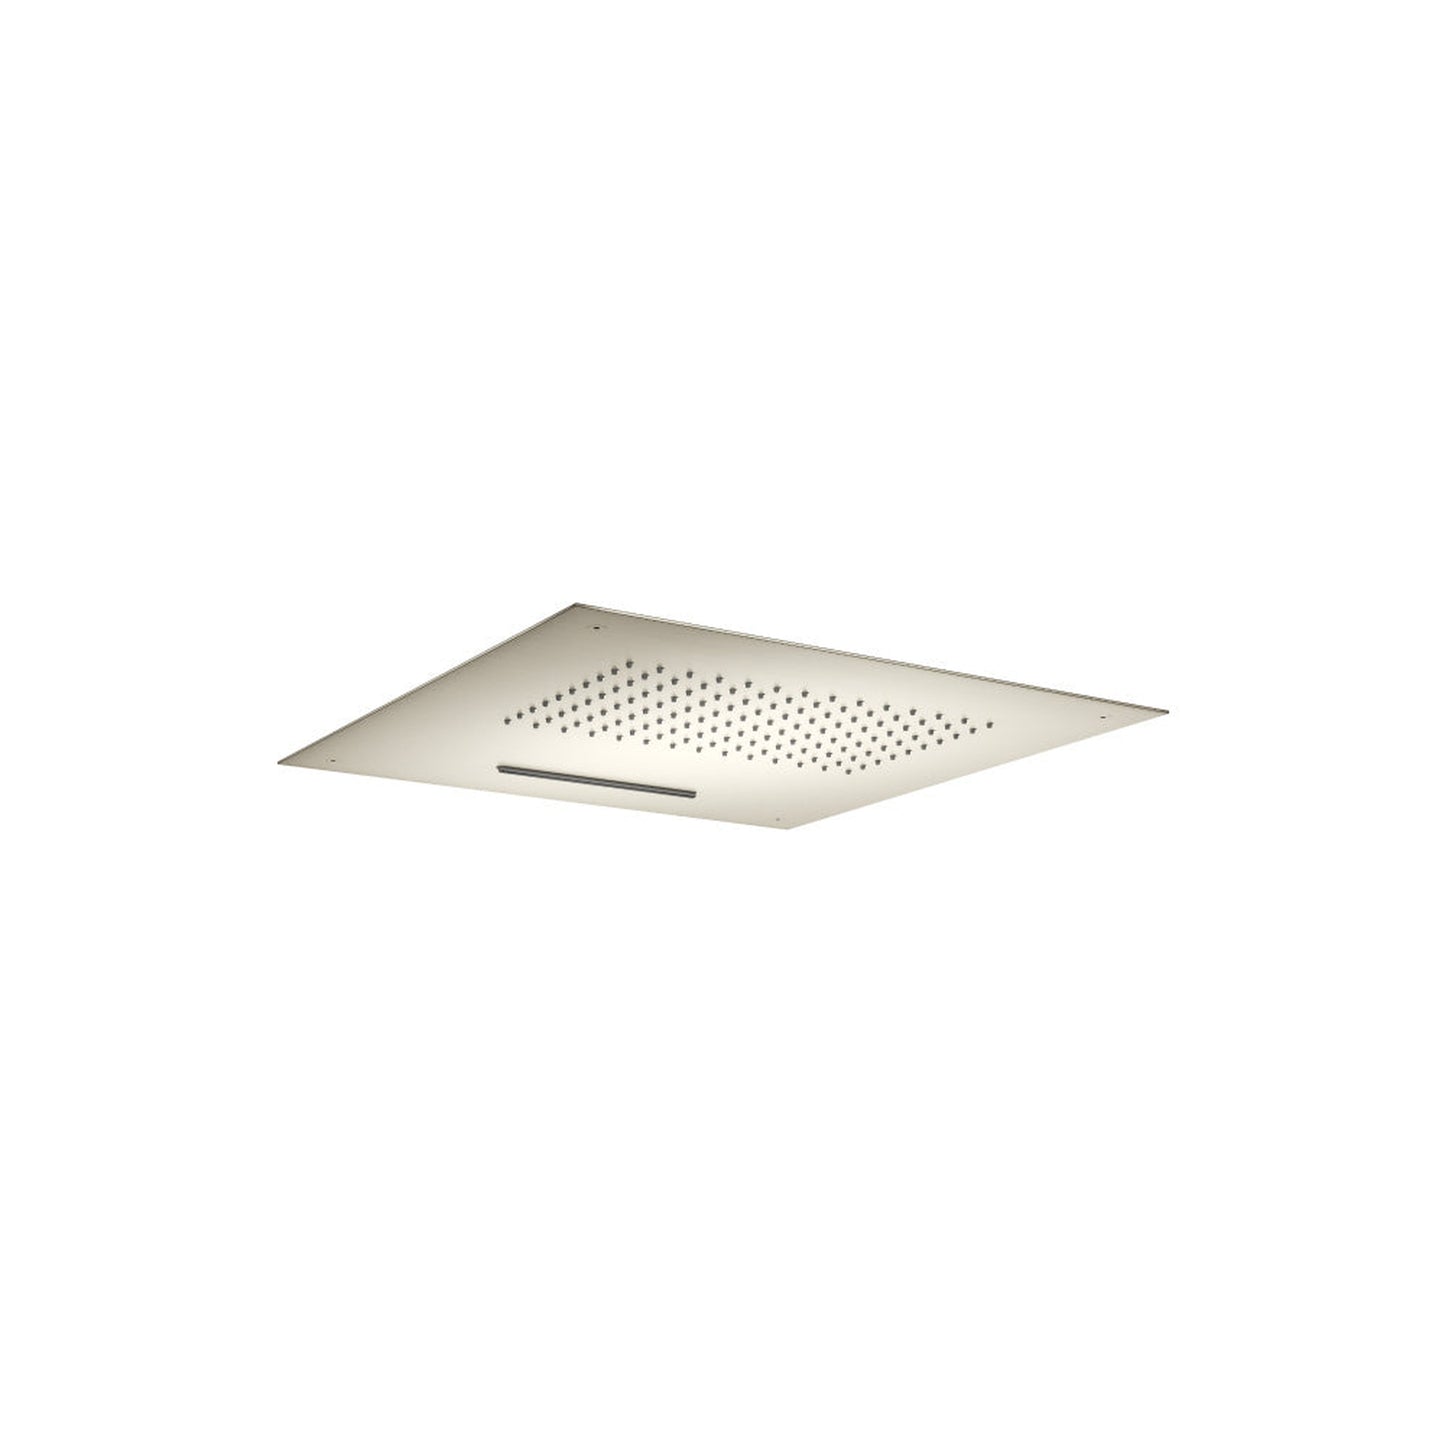 Isenberg Cascade 15" Stainless Steel Flush Mount Rainhead With Cascade Waterfall in Brushed Nickel